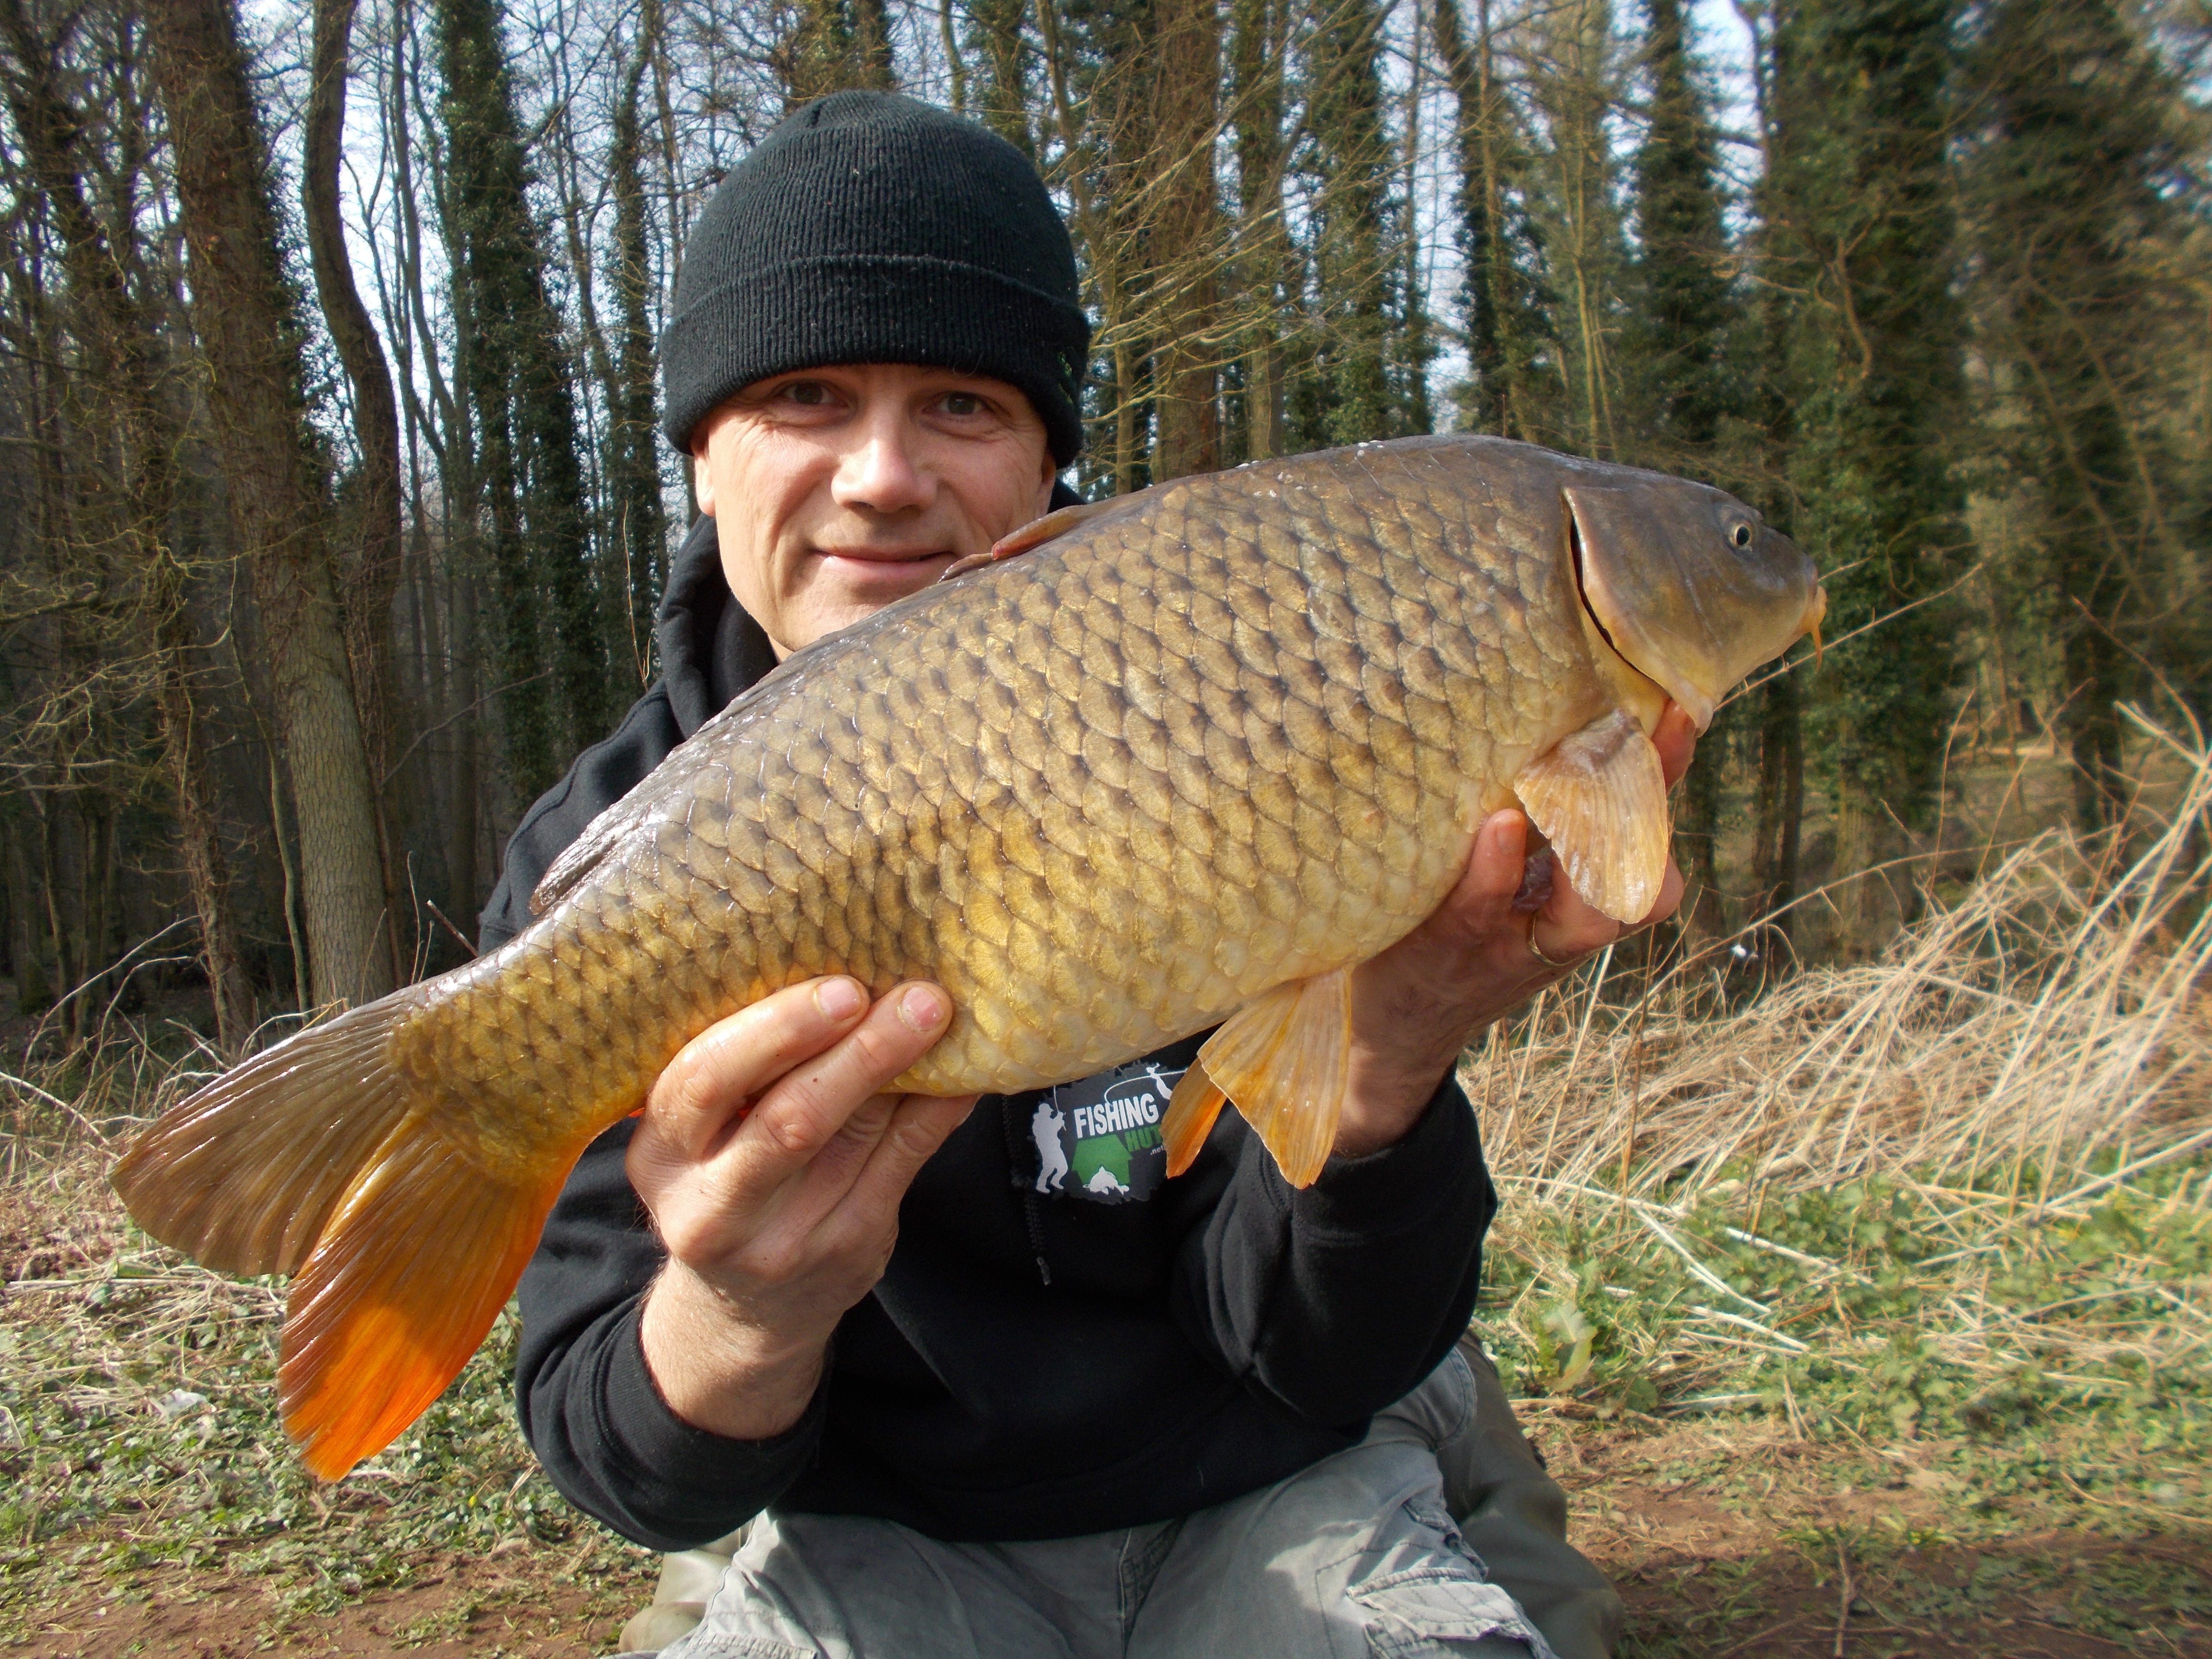 This carp couldn't resist for sure!